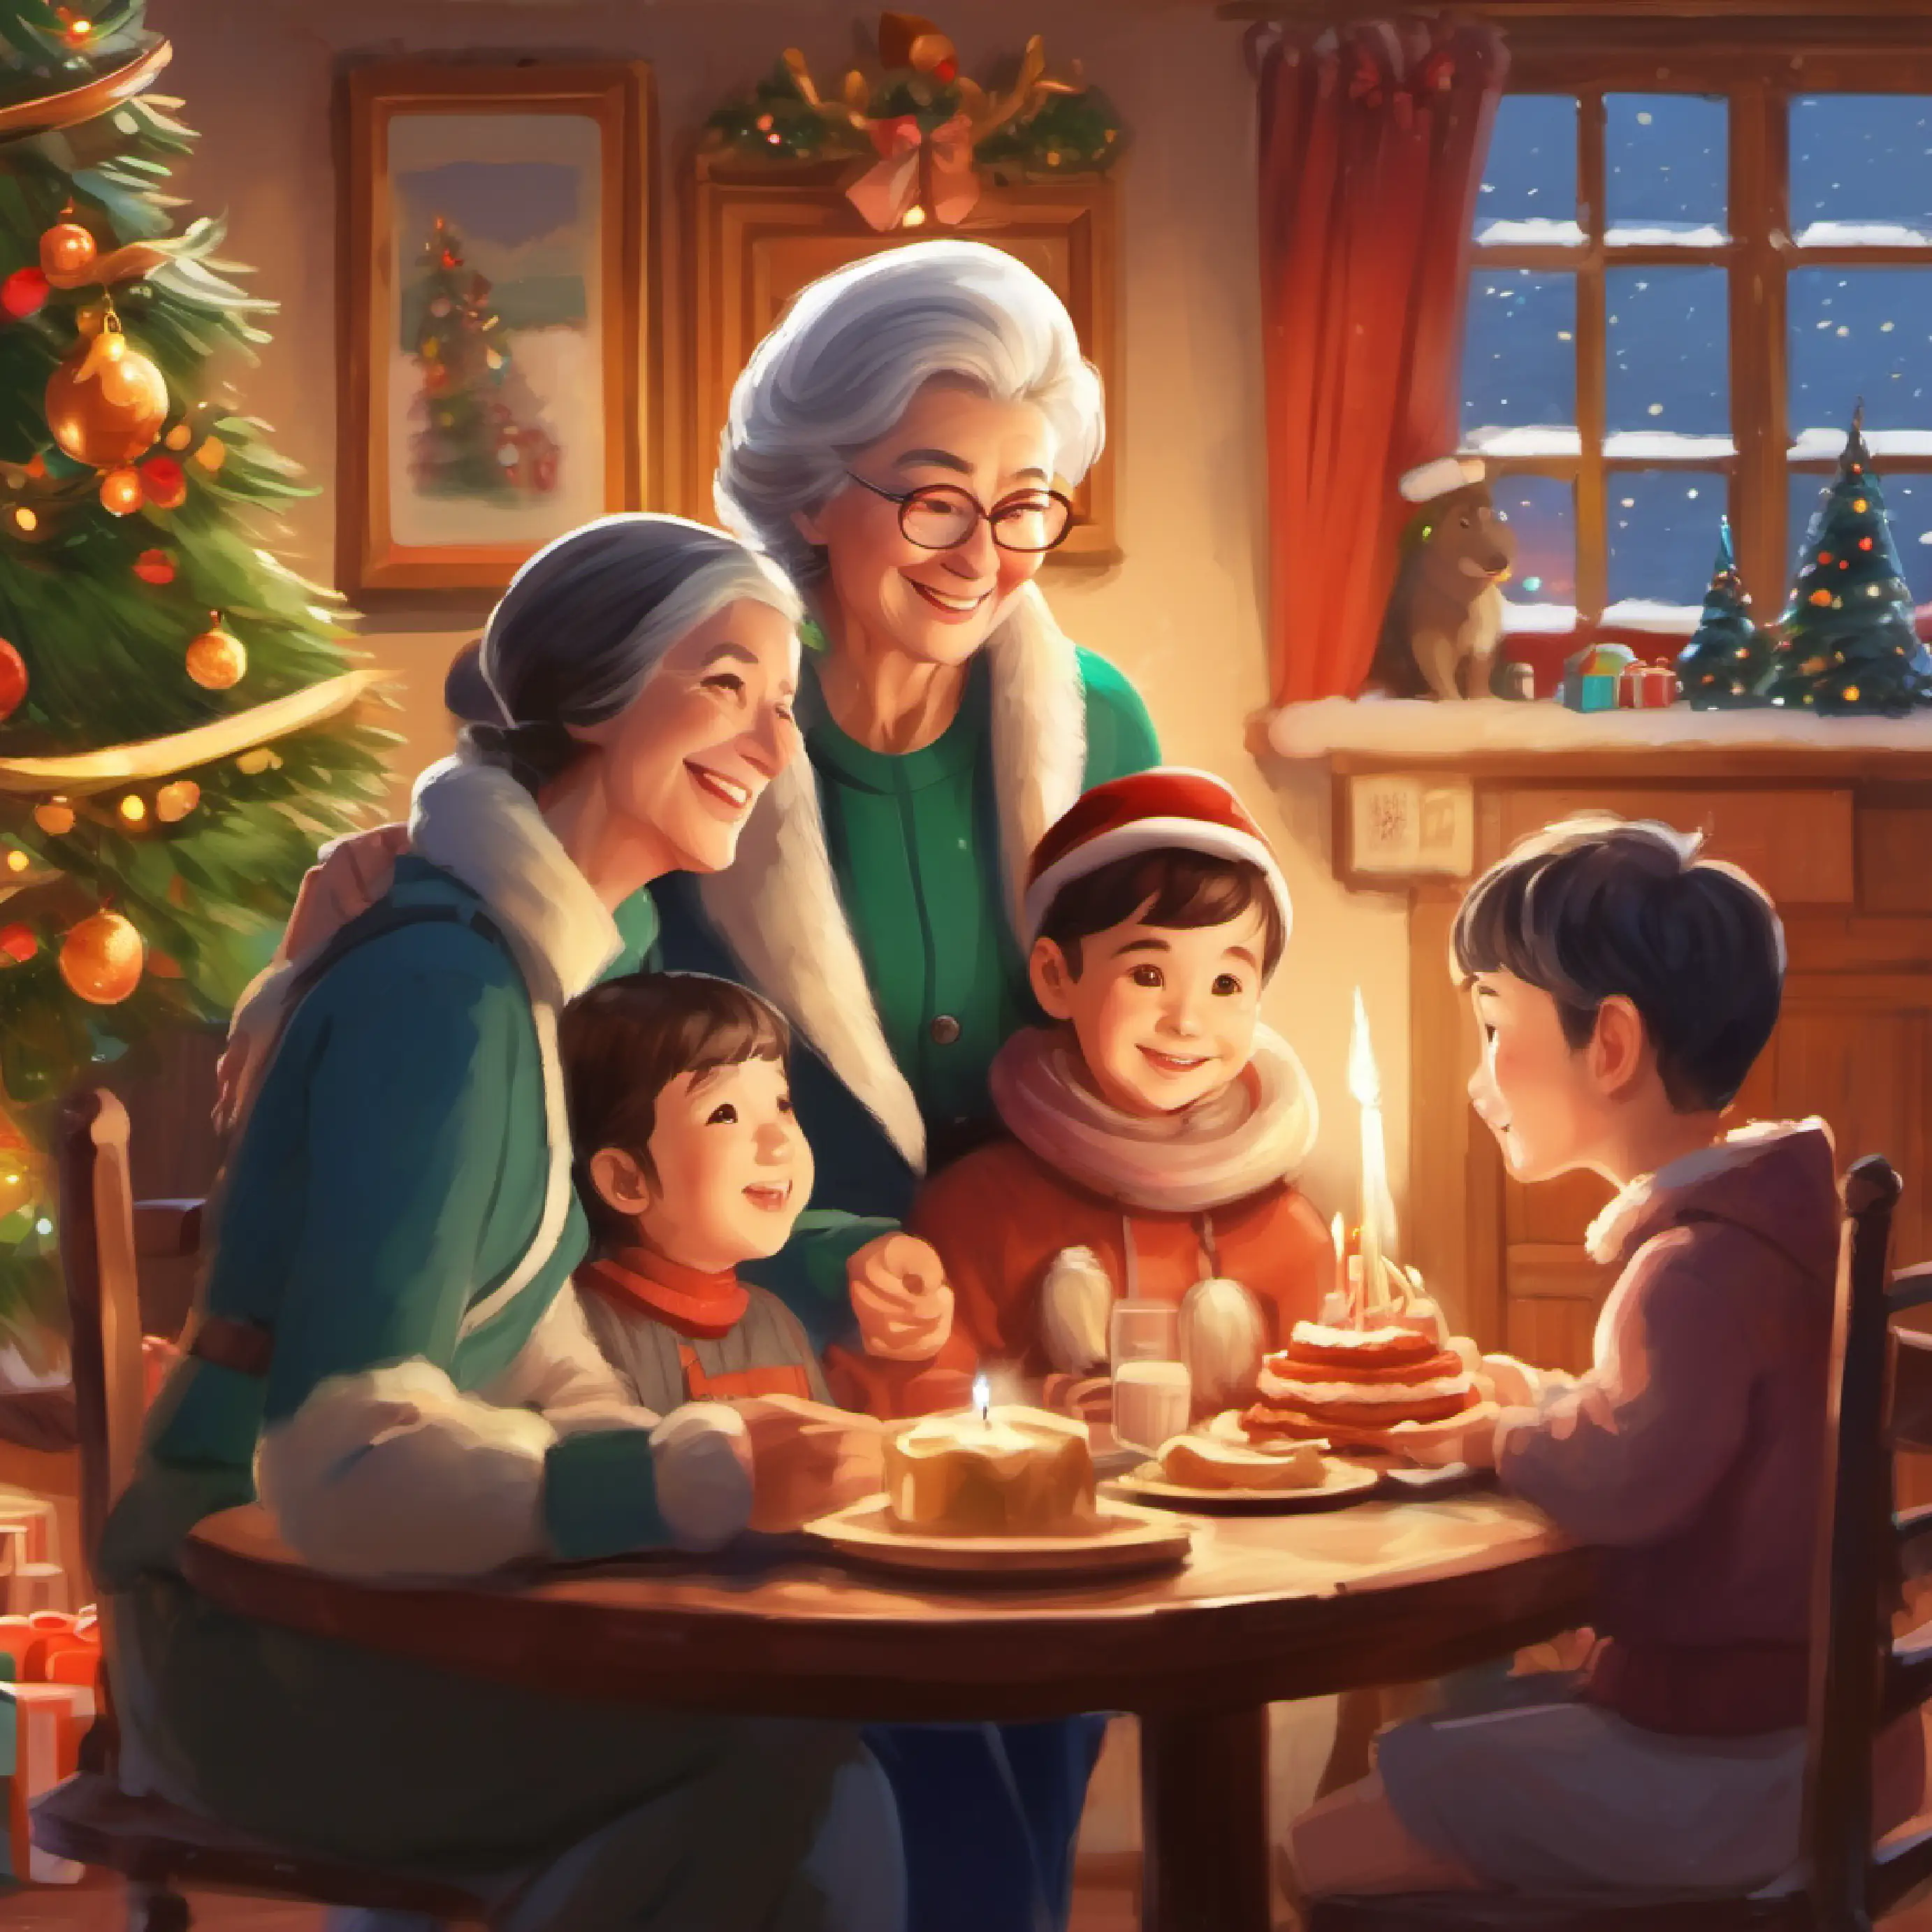 Nan with her family, showing kindness and energy.